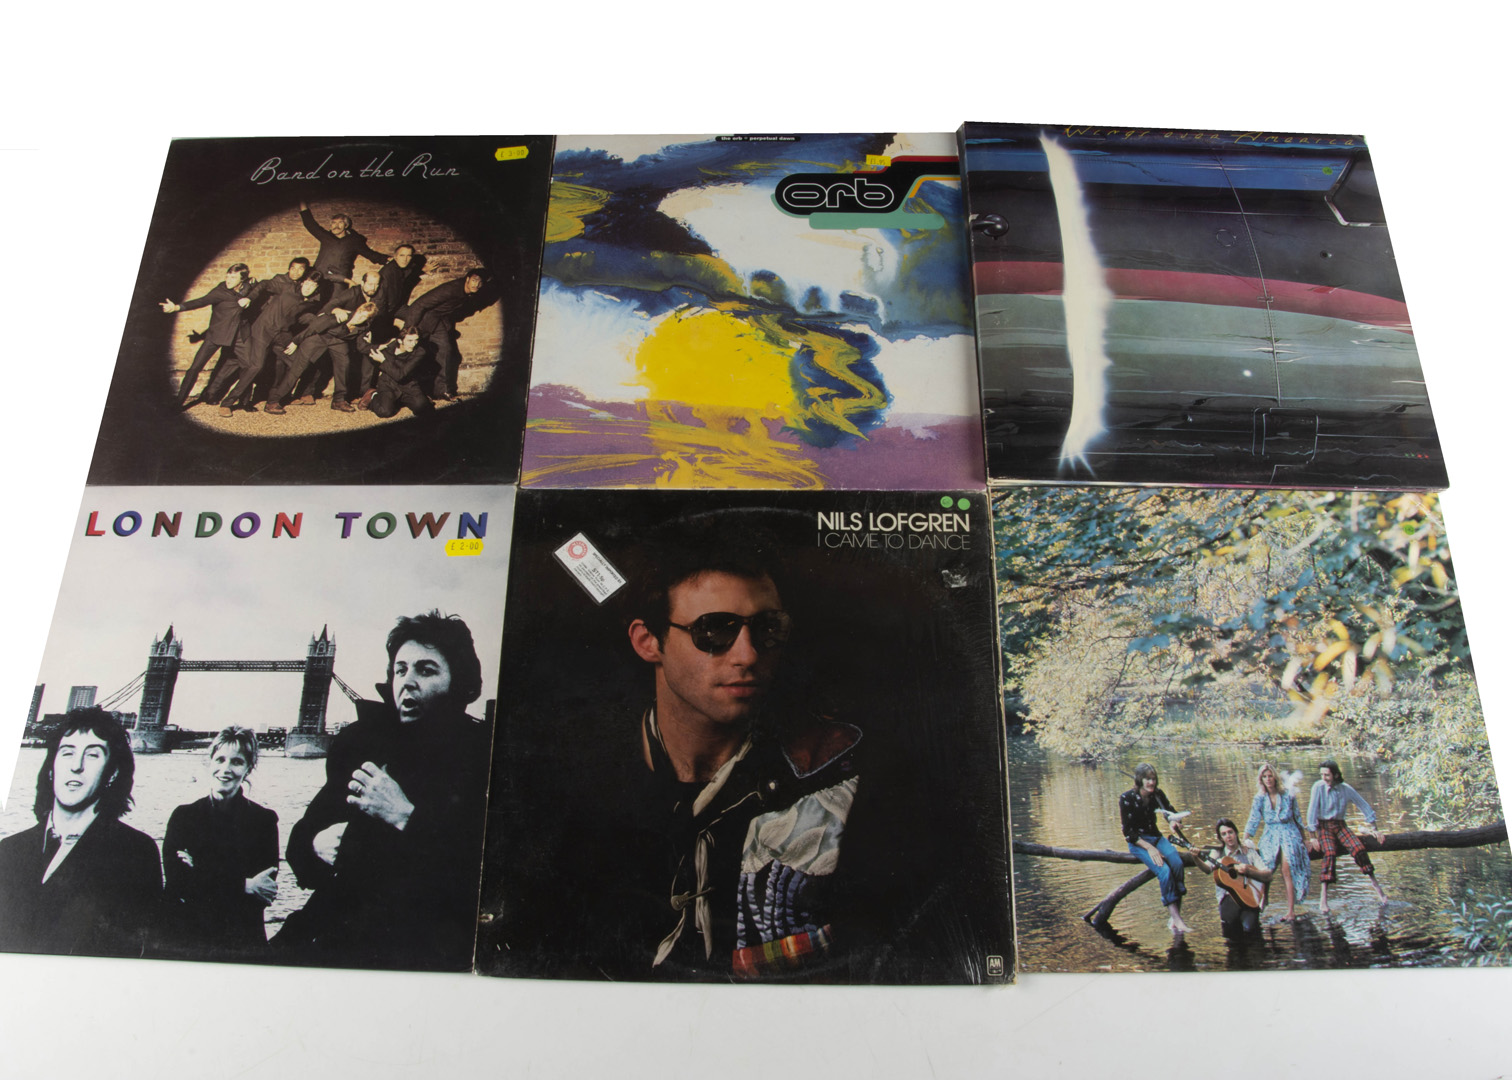 LP Records / 12" Singles, approximately ninety albums, six Box Sets and twenty 12" Singles of